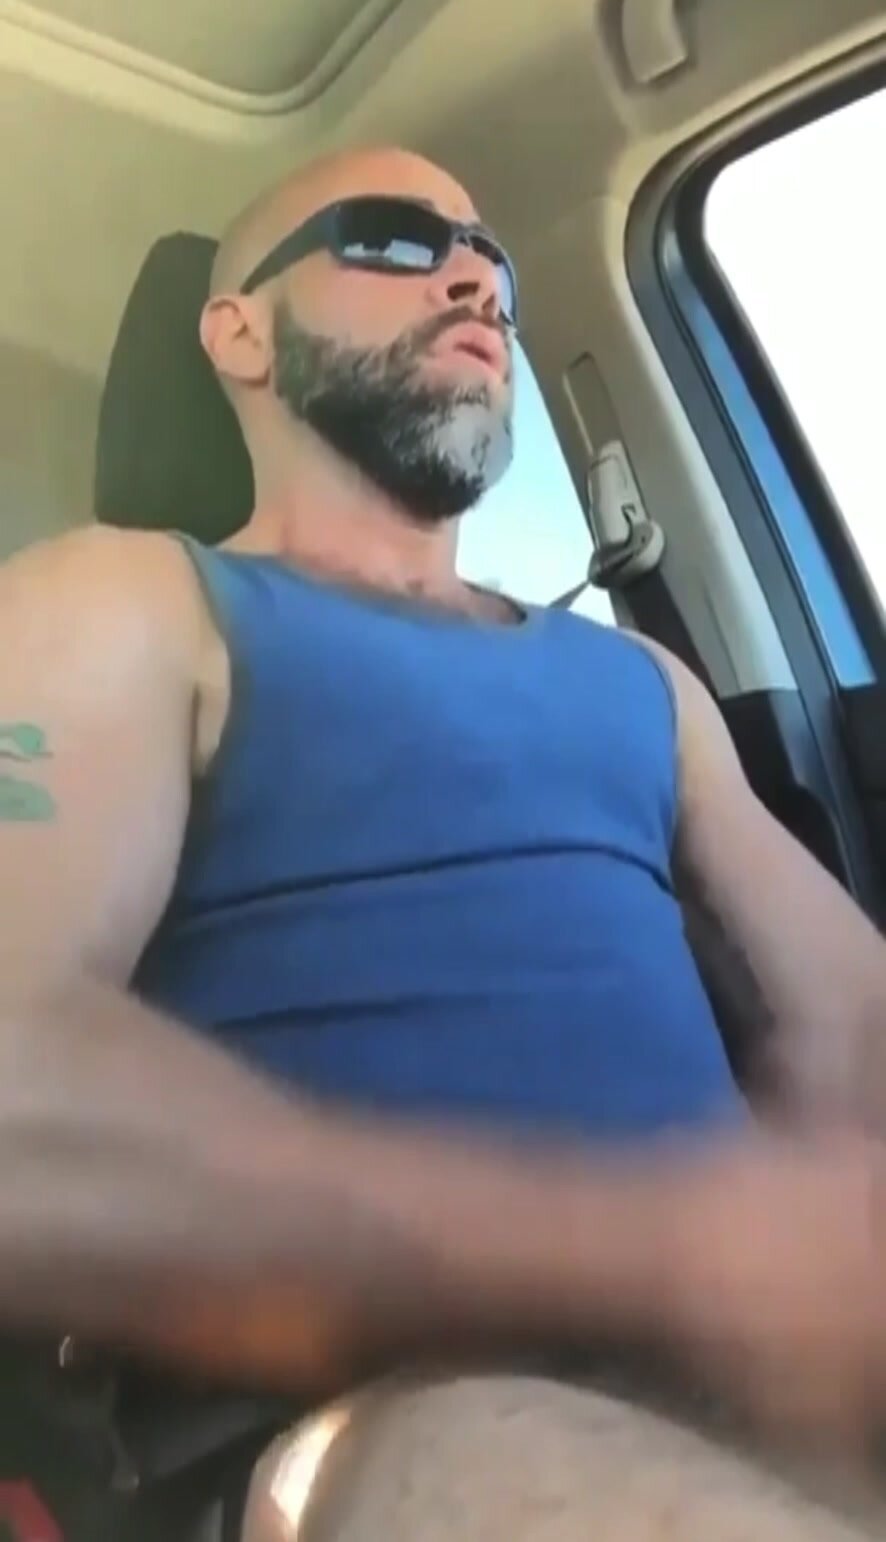 Verbal daddy shoots a load while driving